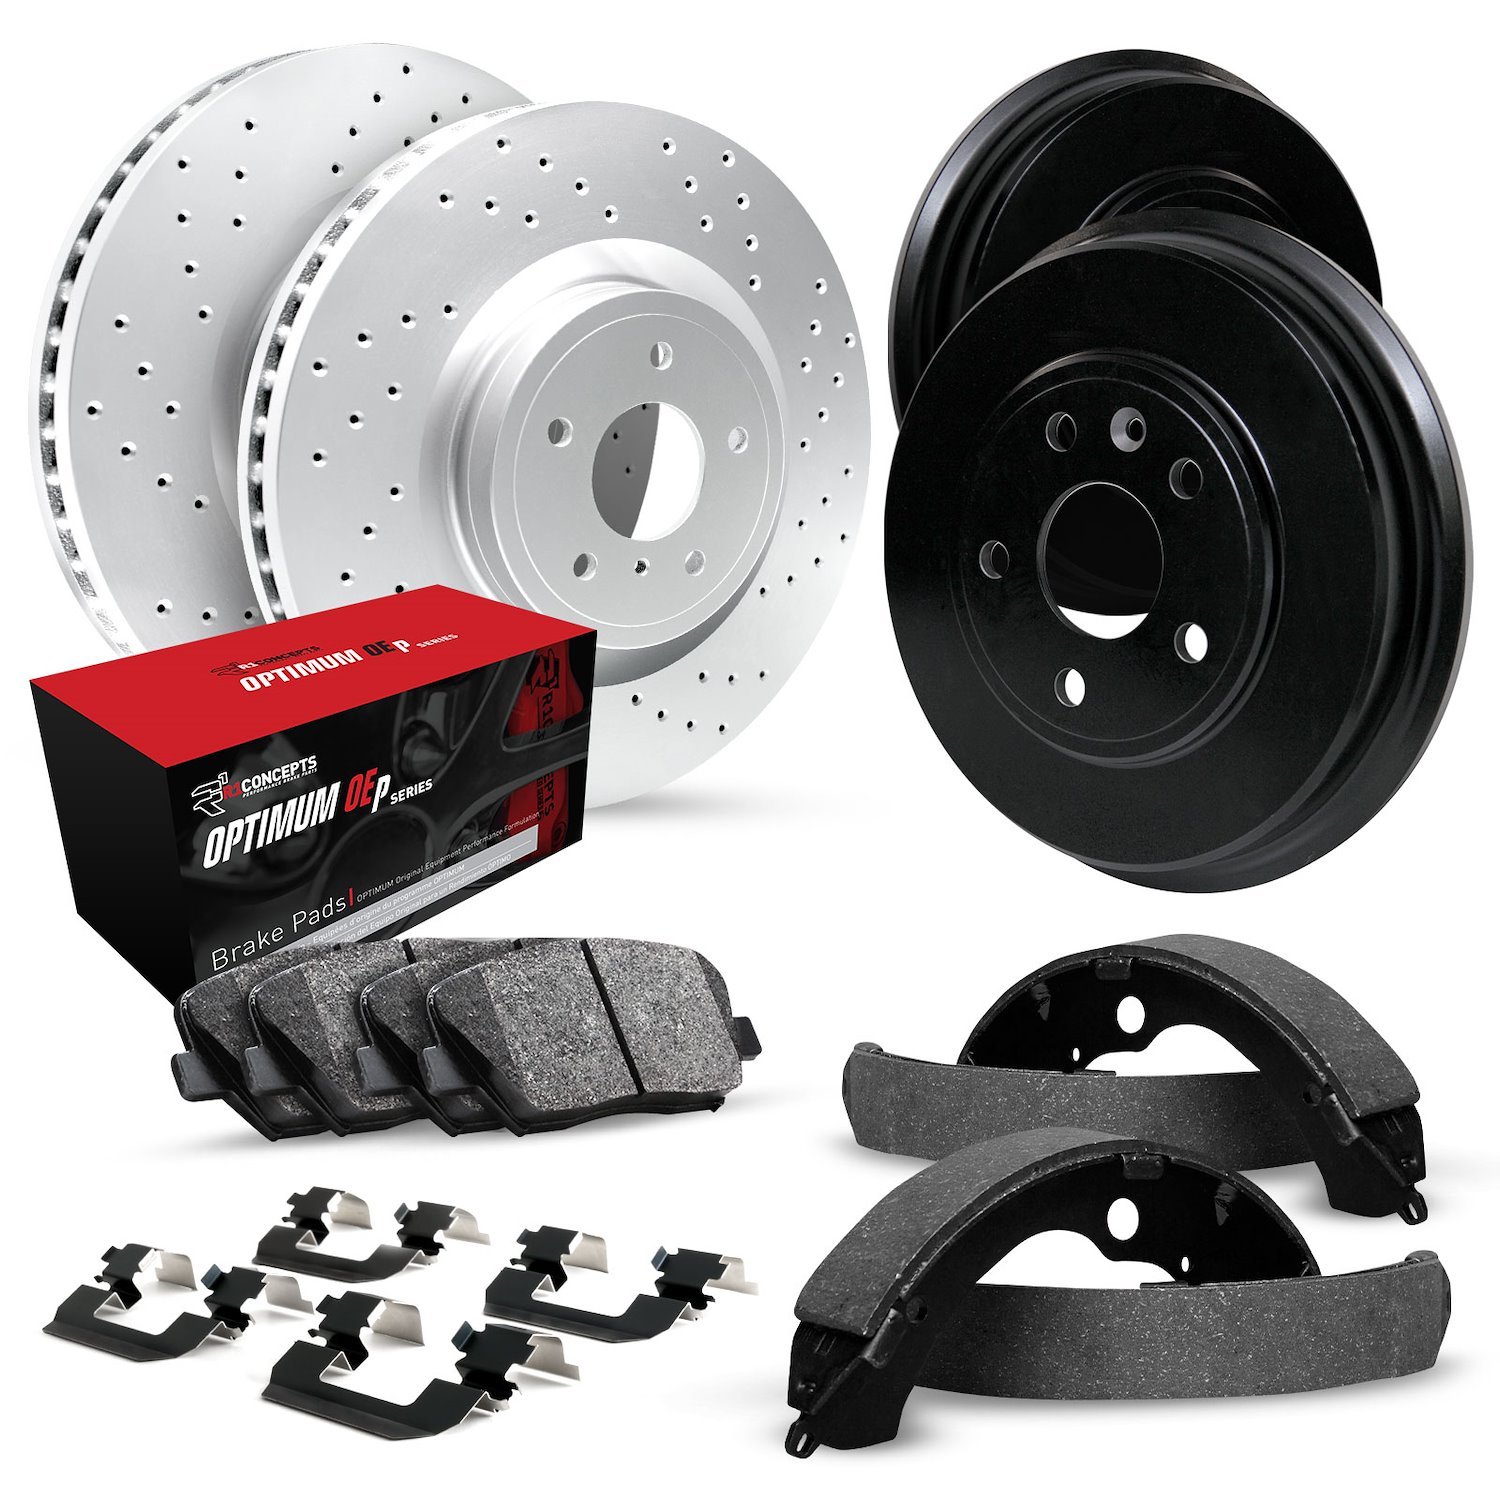 GEO-Carbon Drilled Brake Rotor & Drum Set w/Optimum OE Pads, Shoes, & Hardware, 1986-1990 GM, Position: Front & Rear